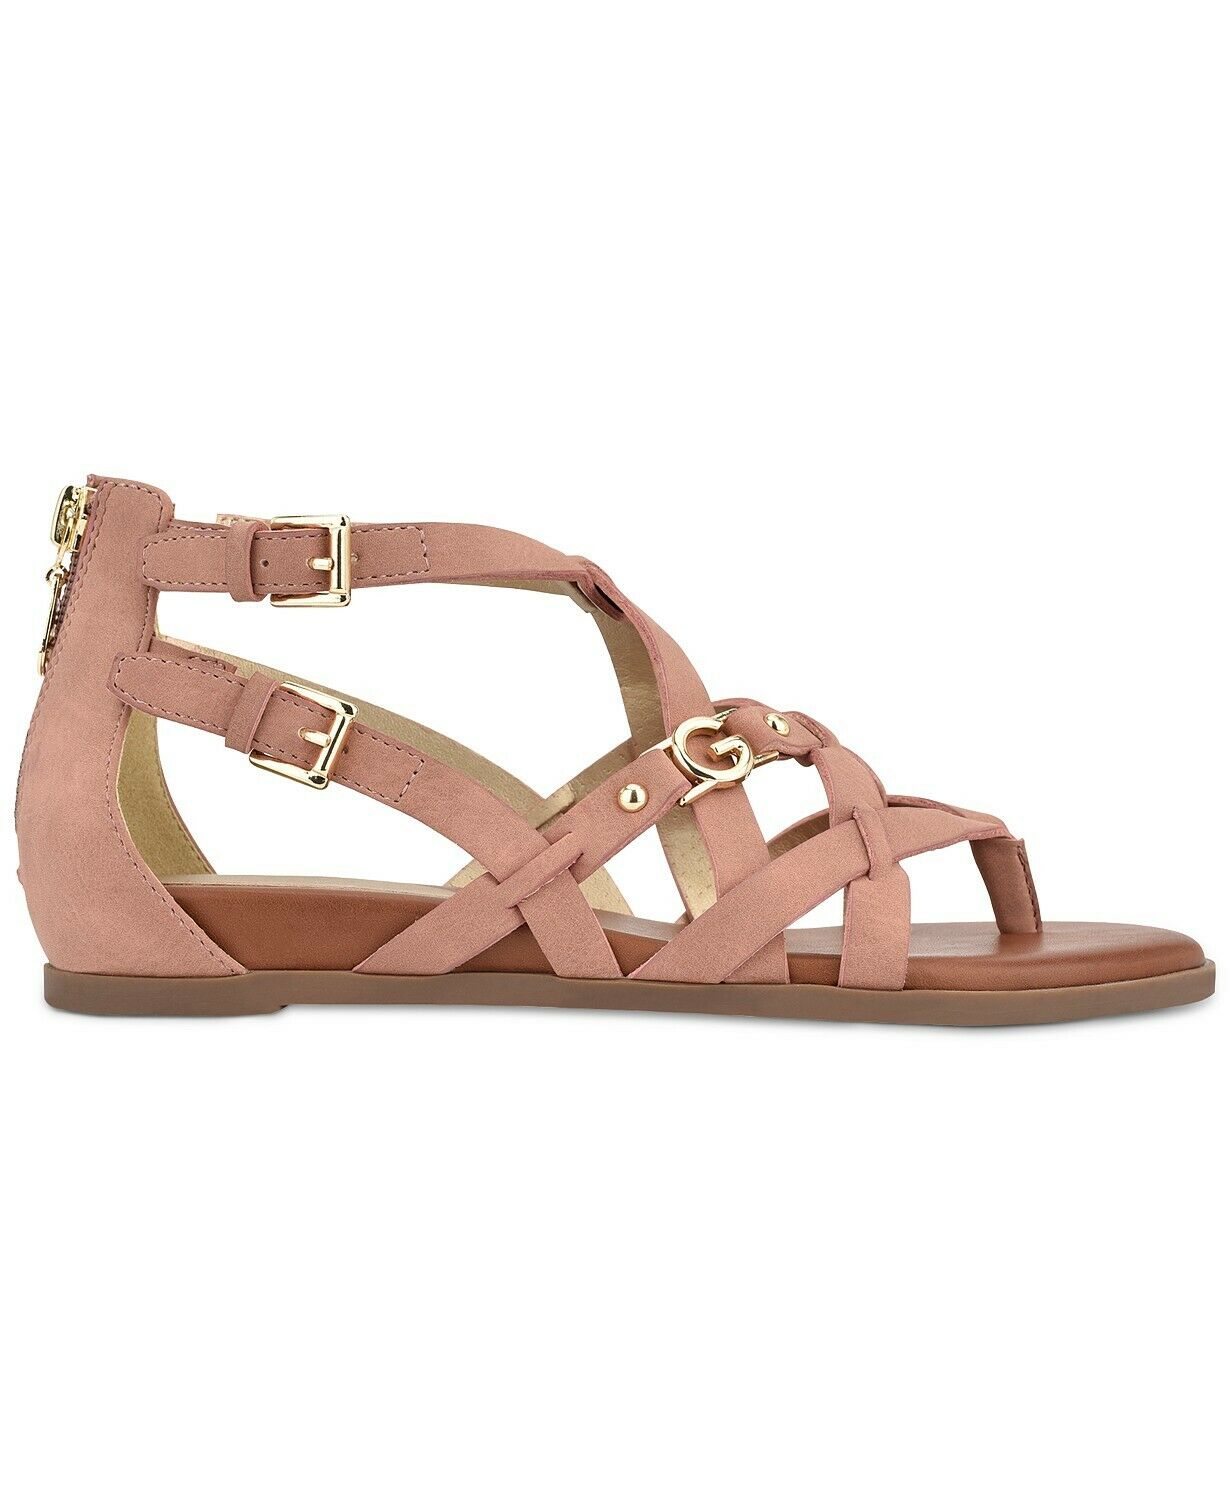 woocommerce-673321-2209615.cloudwaysapps.com-gbg-los-angeles-womens-pink-cobell-strappy-gladiator-sandals